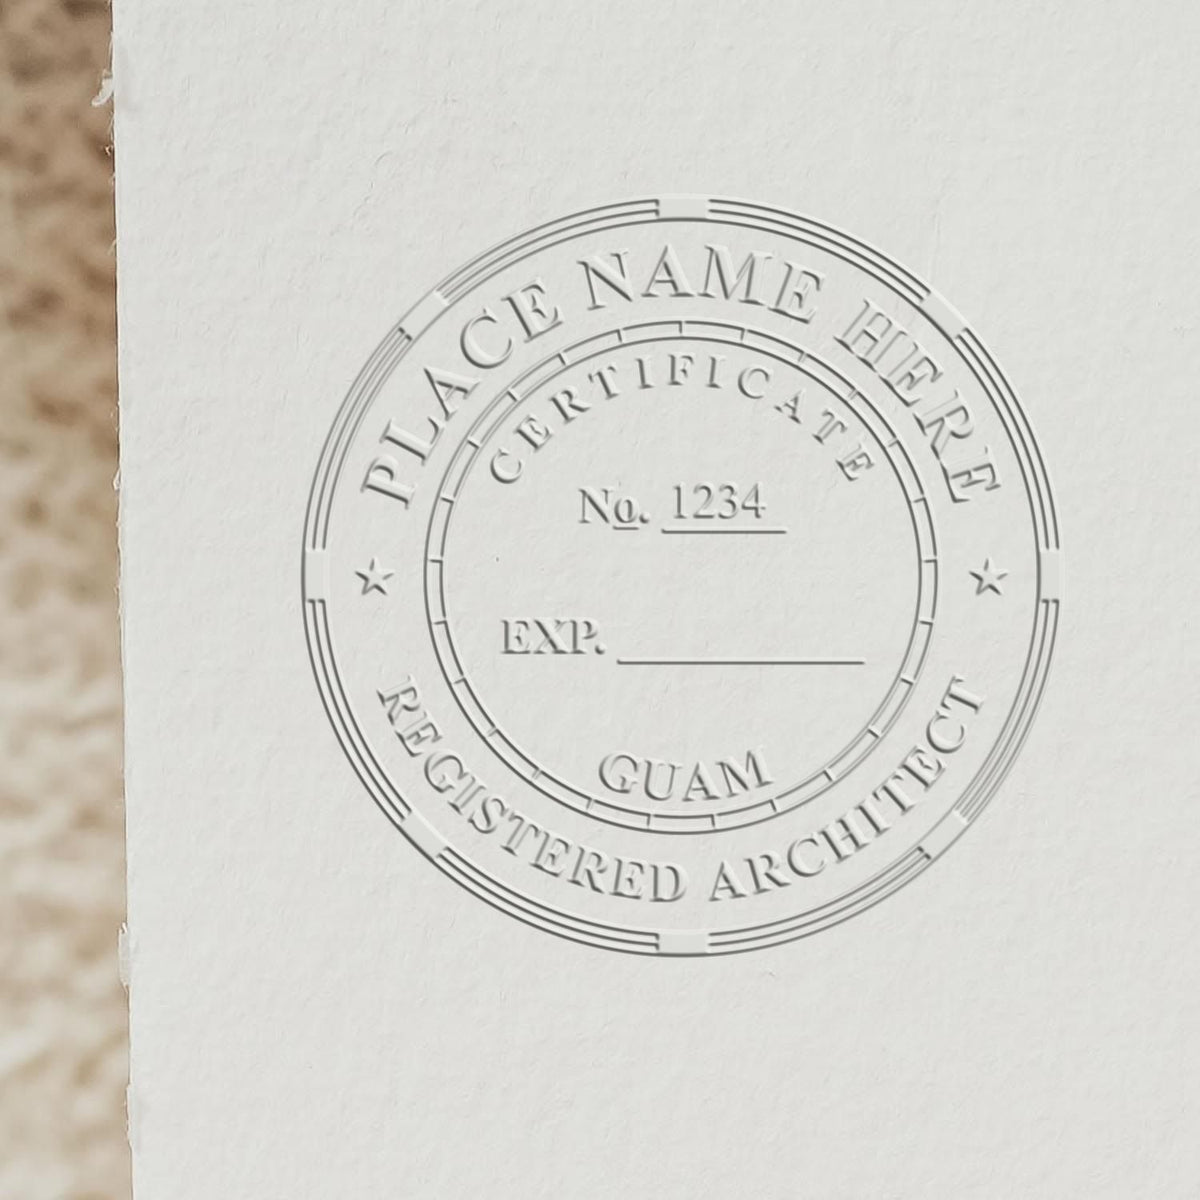 The Gift Guam Architect Seal stamp impression comes to life with a crisp, detailed image stamped on paper - showcasing true professional quality.